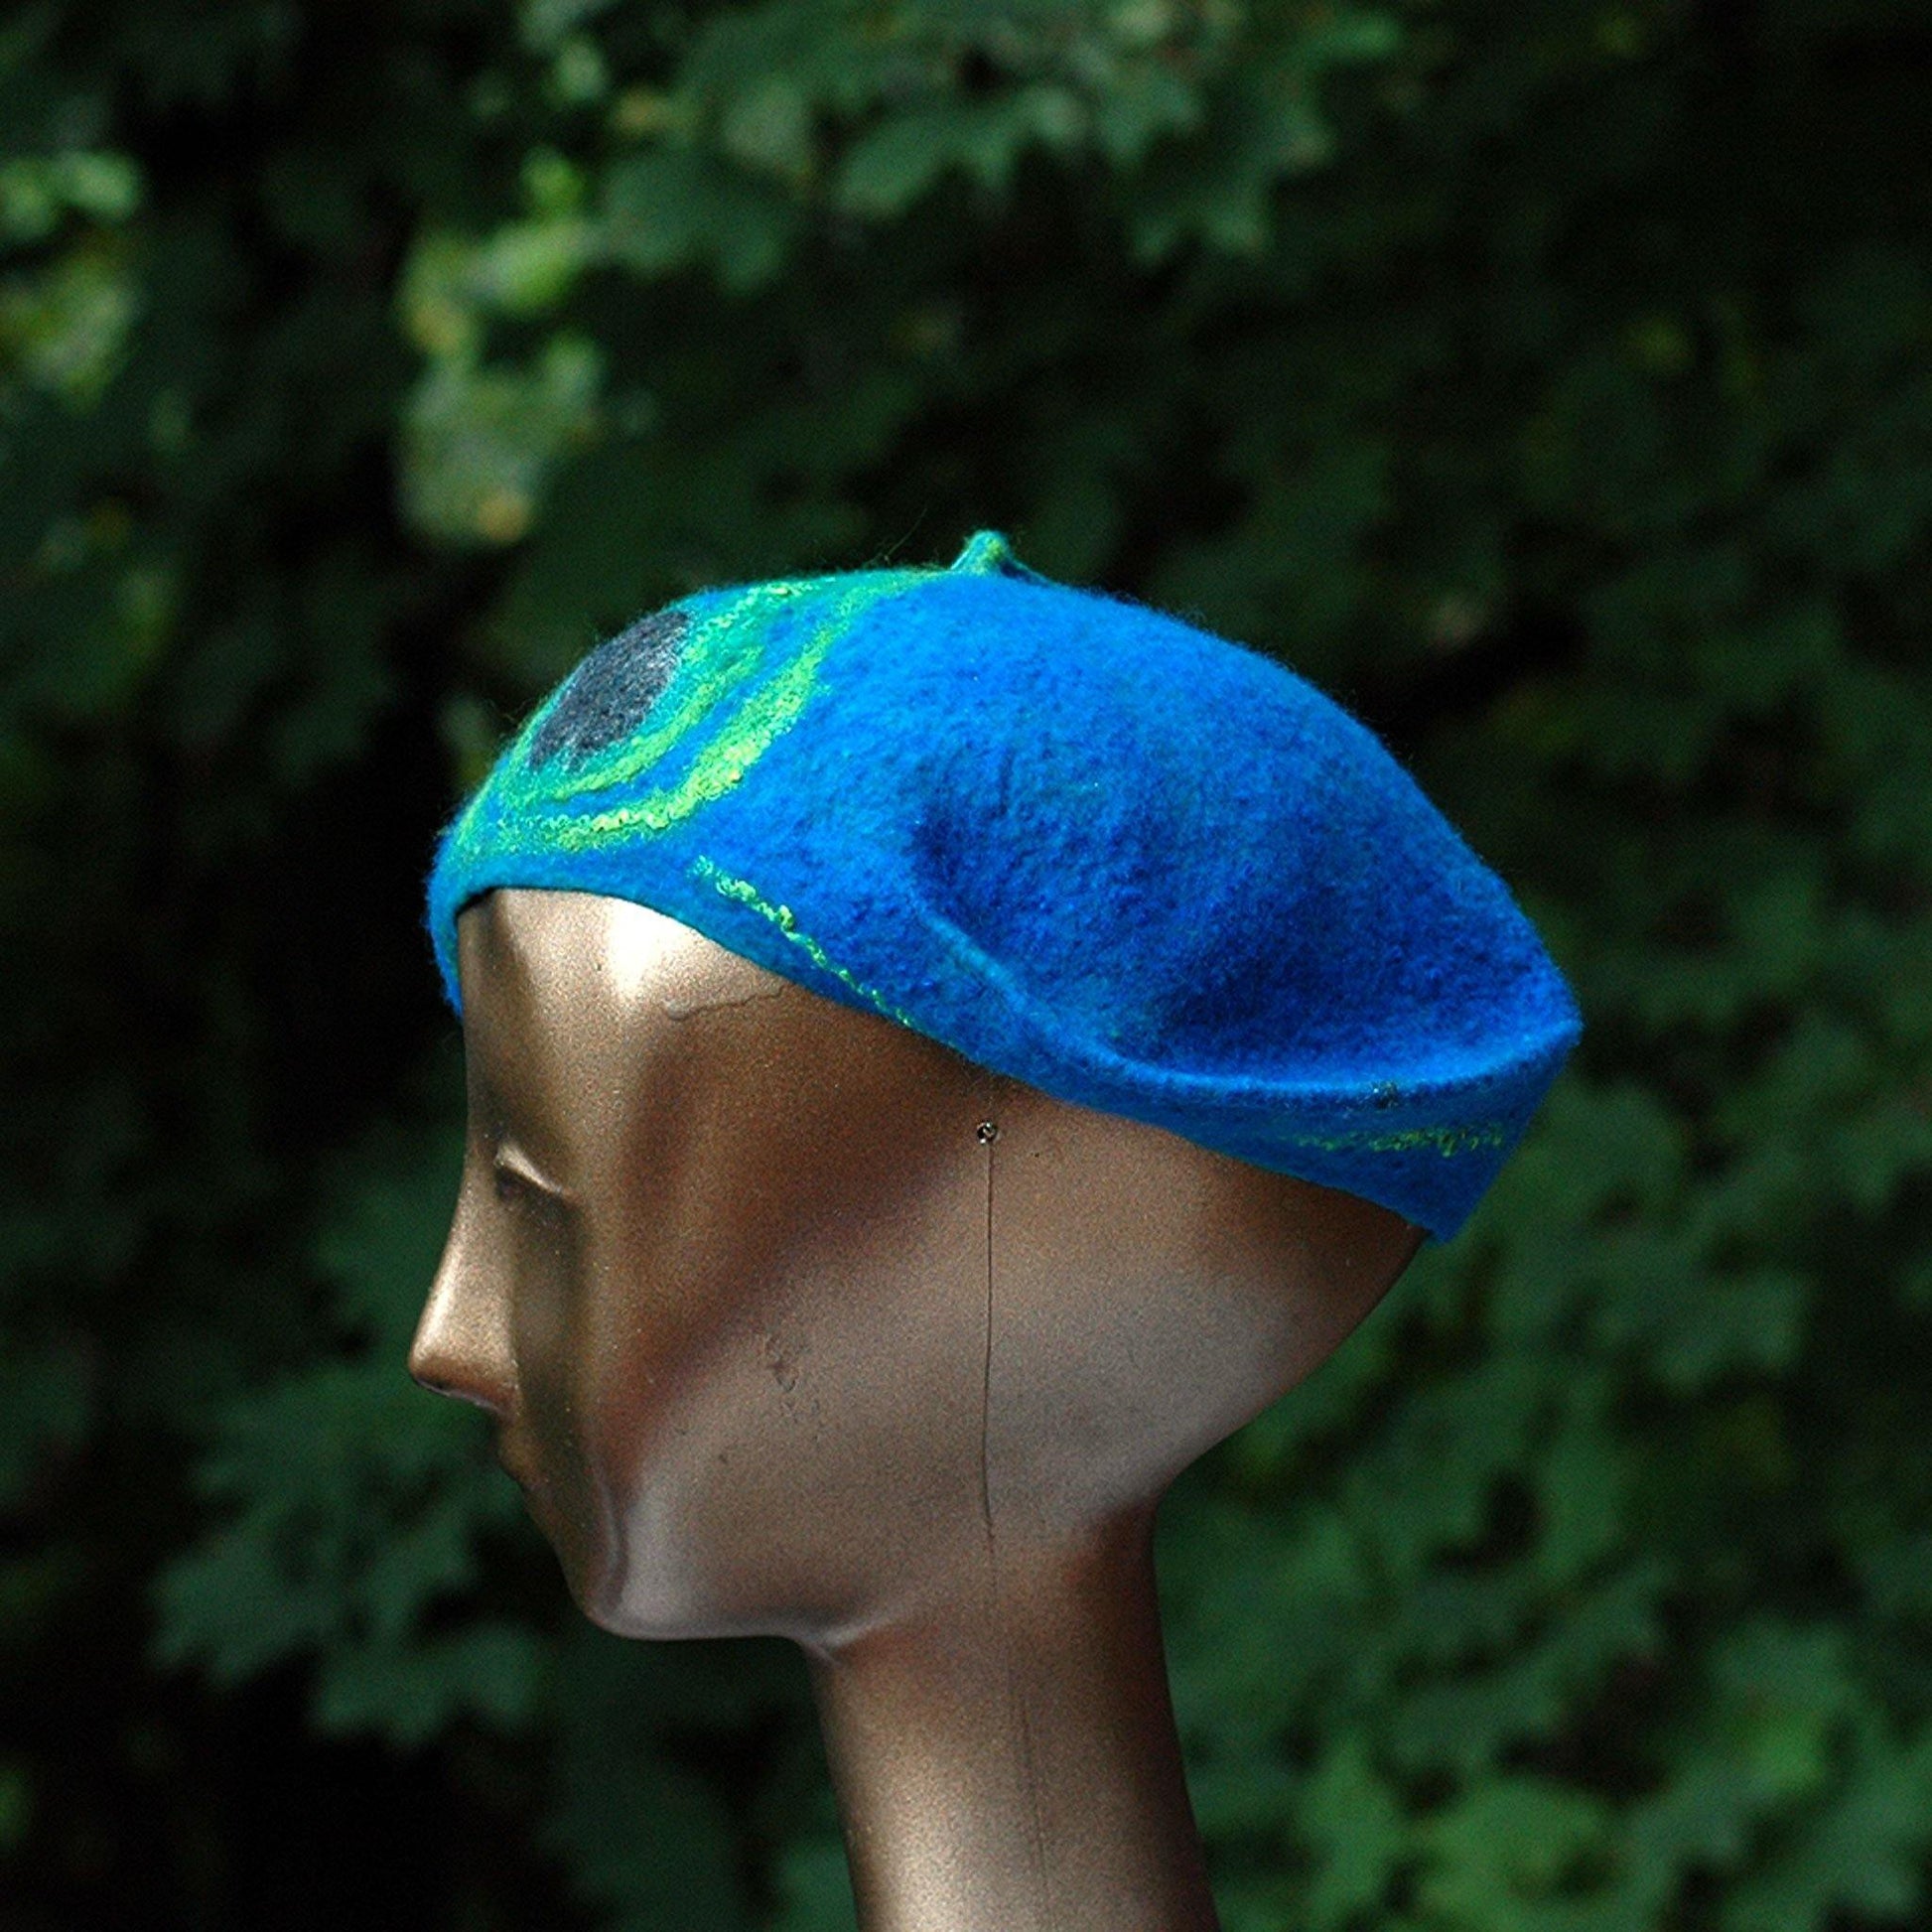 Teal Felted Cap with Stylized Peacock Feathers - side view